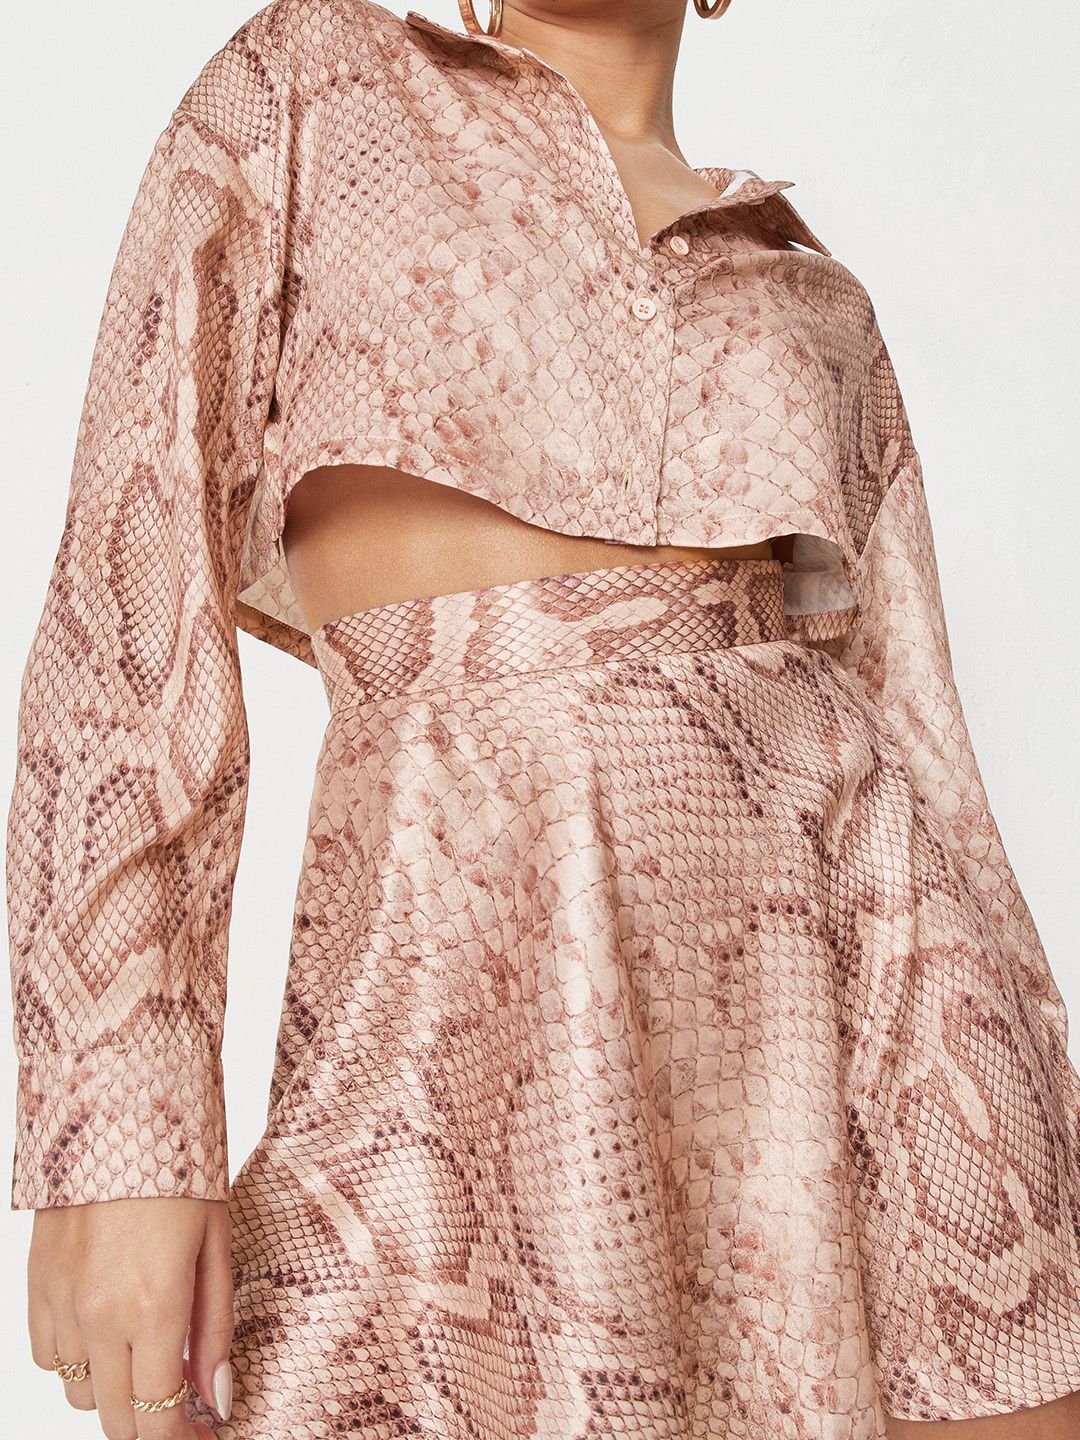 Missguided Women Beige & Brown Snakeskin Print Cropped Satin Finish Beach Cover-Up Shirt Price in India